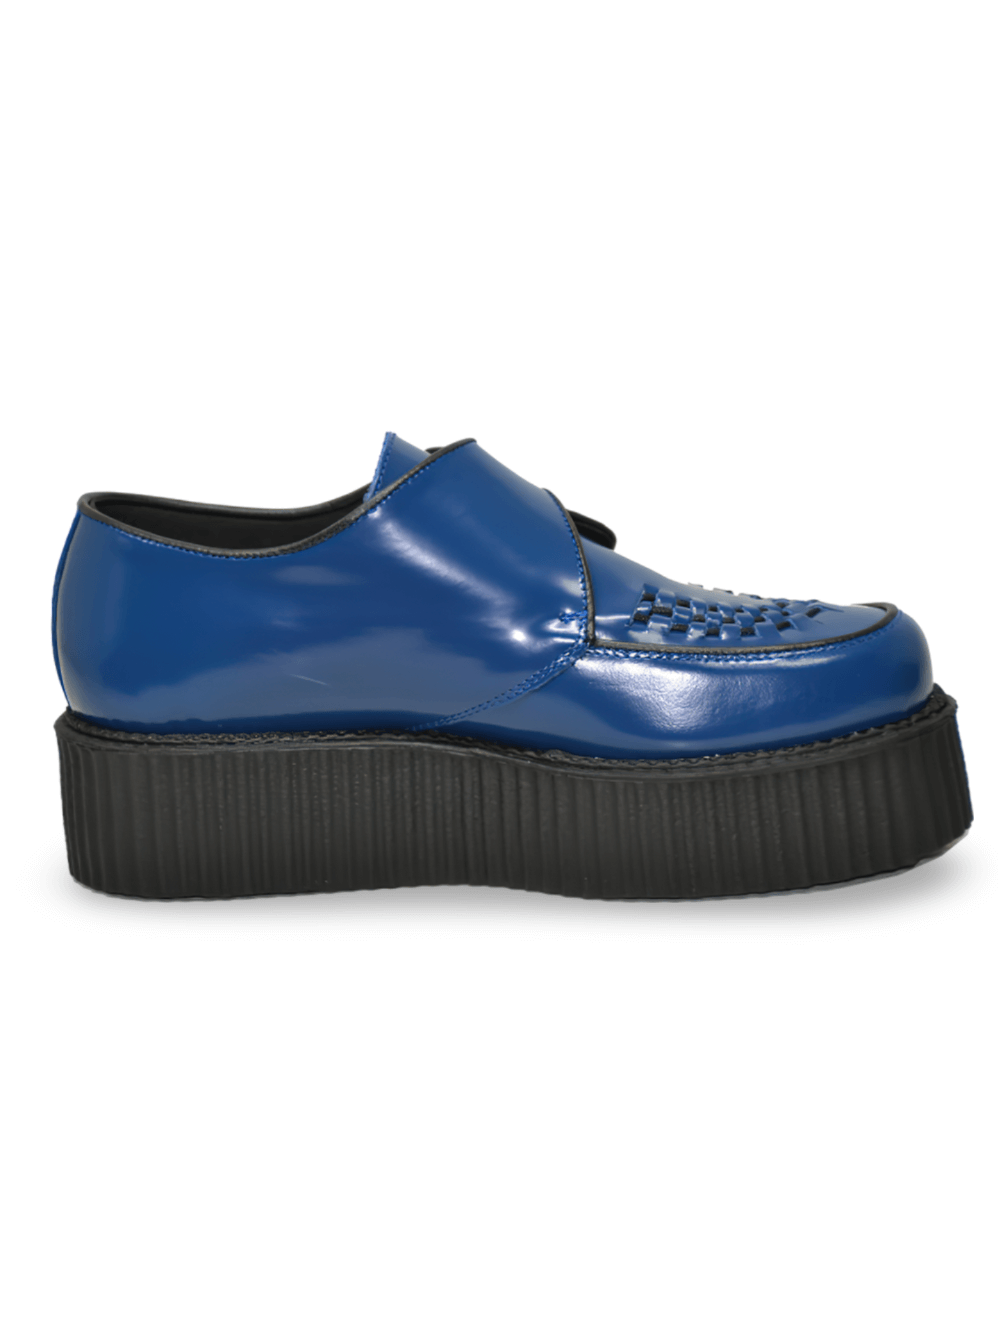 Round Toe Leather Creepers with Buckle and Double Sole